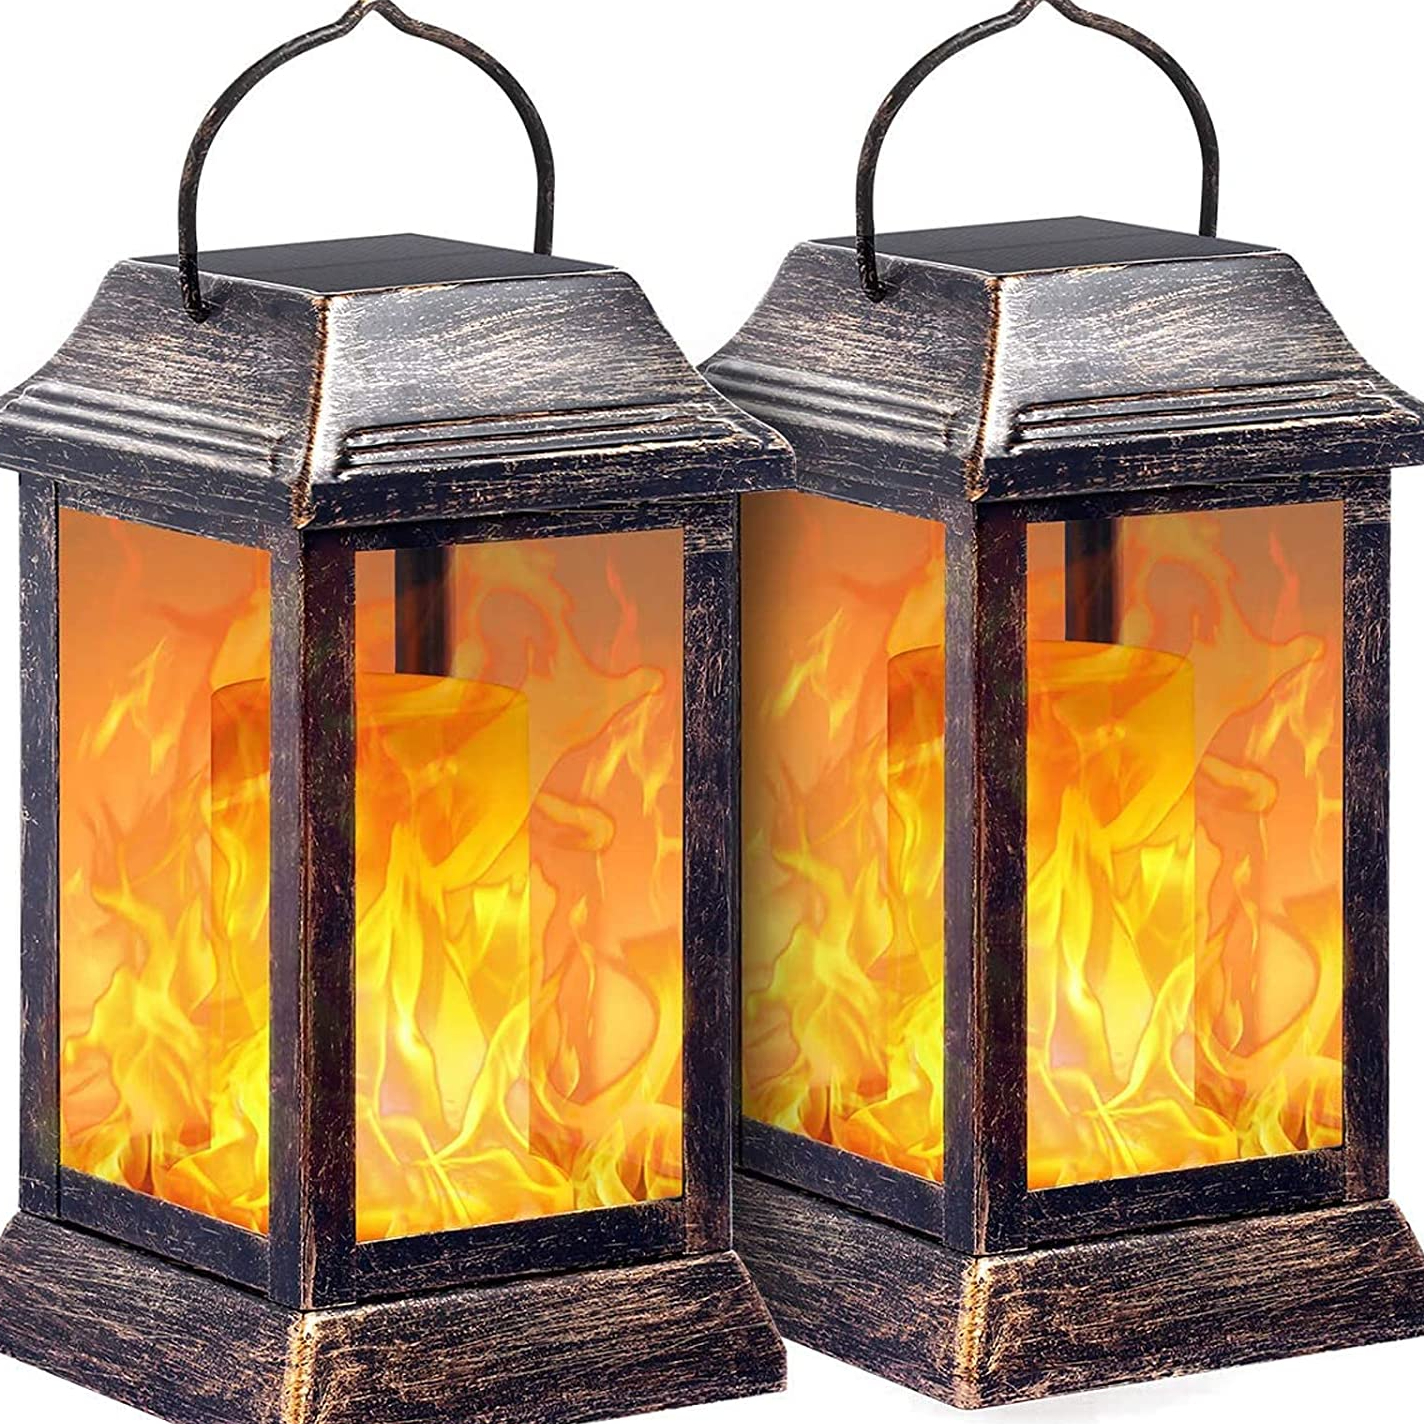 
Roll over image to zoom in







3 VIDEOS
TomCare Solar Lights Metal Flickering Flame Solar Lantern Outdoor Hanging Lanterns Lighting Heavy Duty Solar Powered Waterproof LED Flame Lights for Patio Garden Yard Christmas, 2 Pack (Bronze)